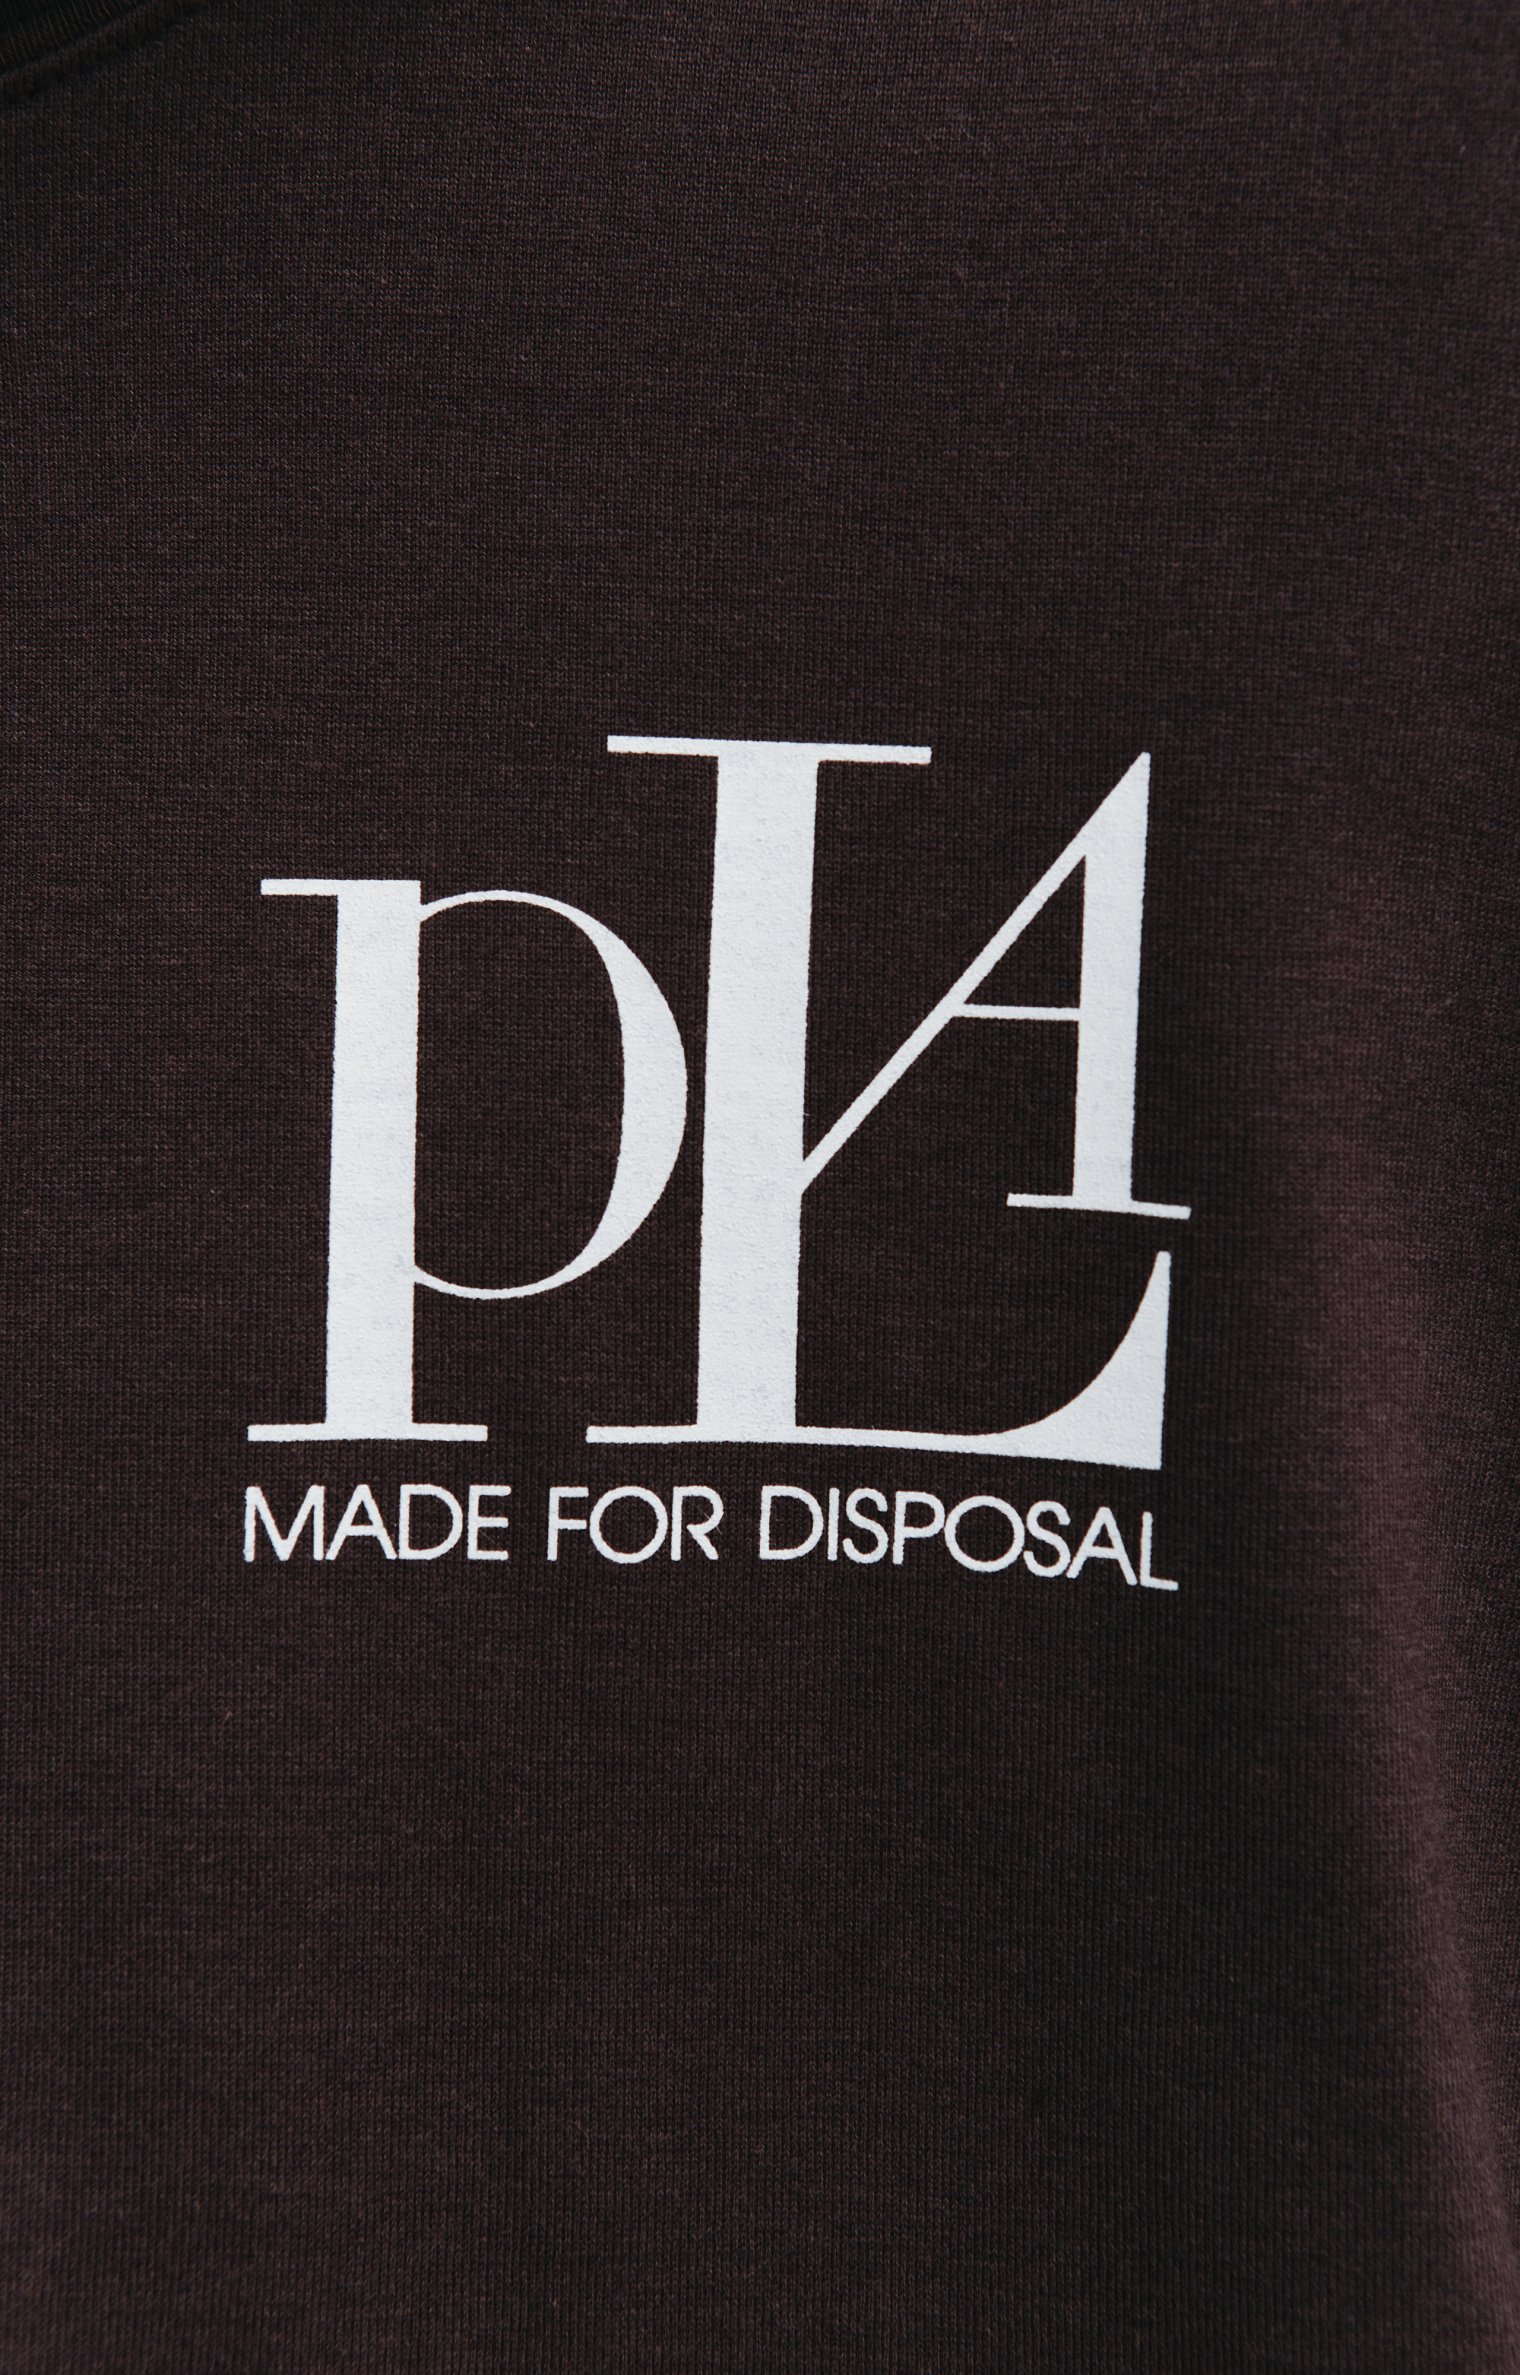 Doublet \'Made for disposal\' longsleeve